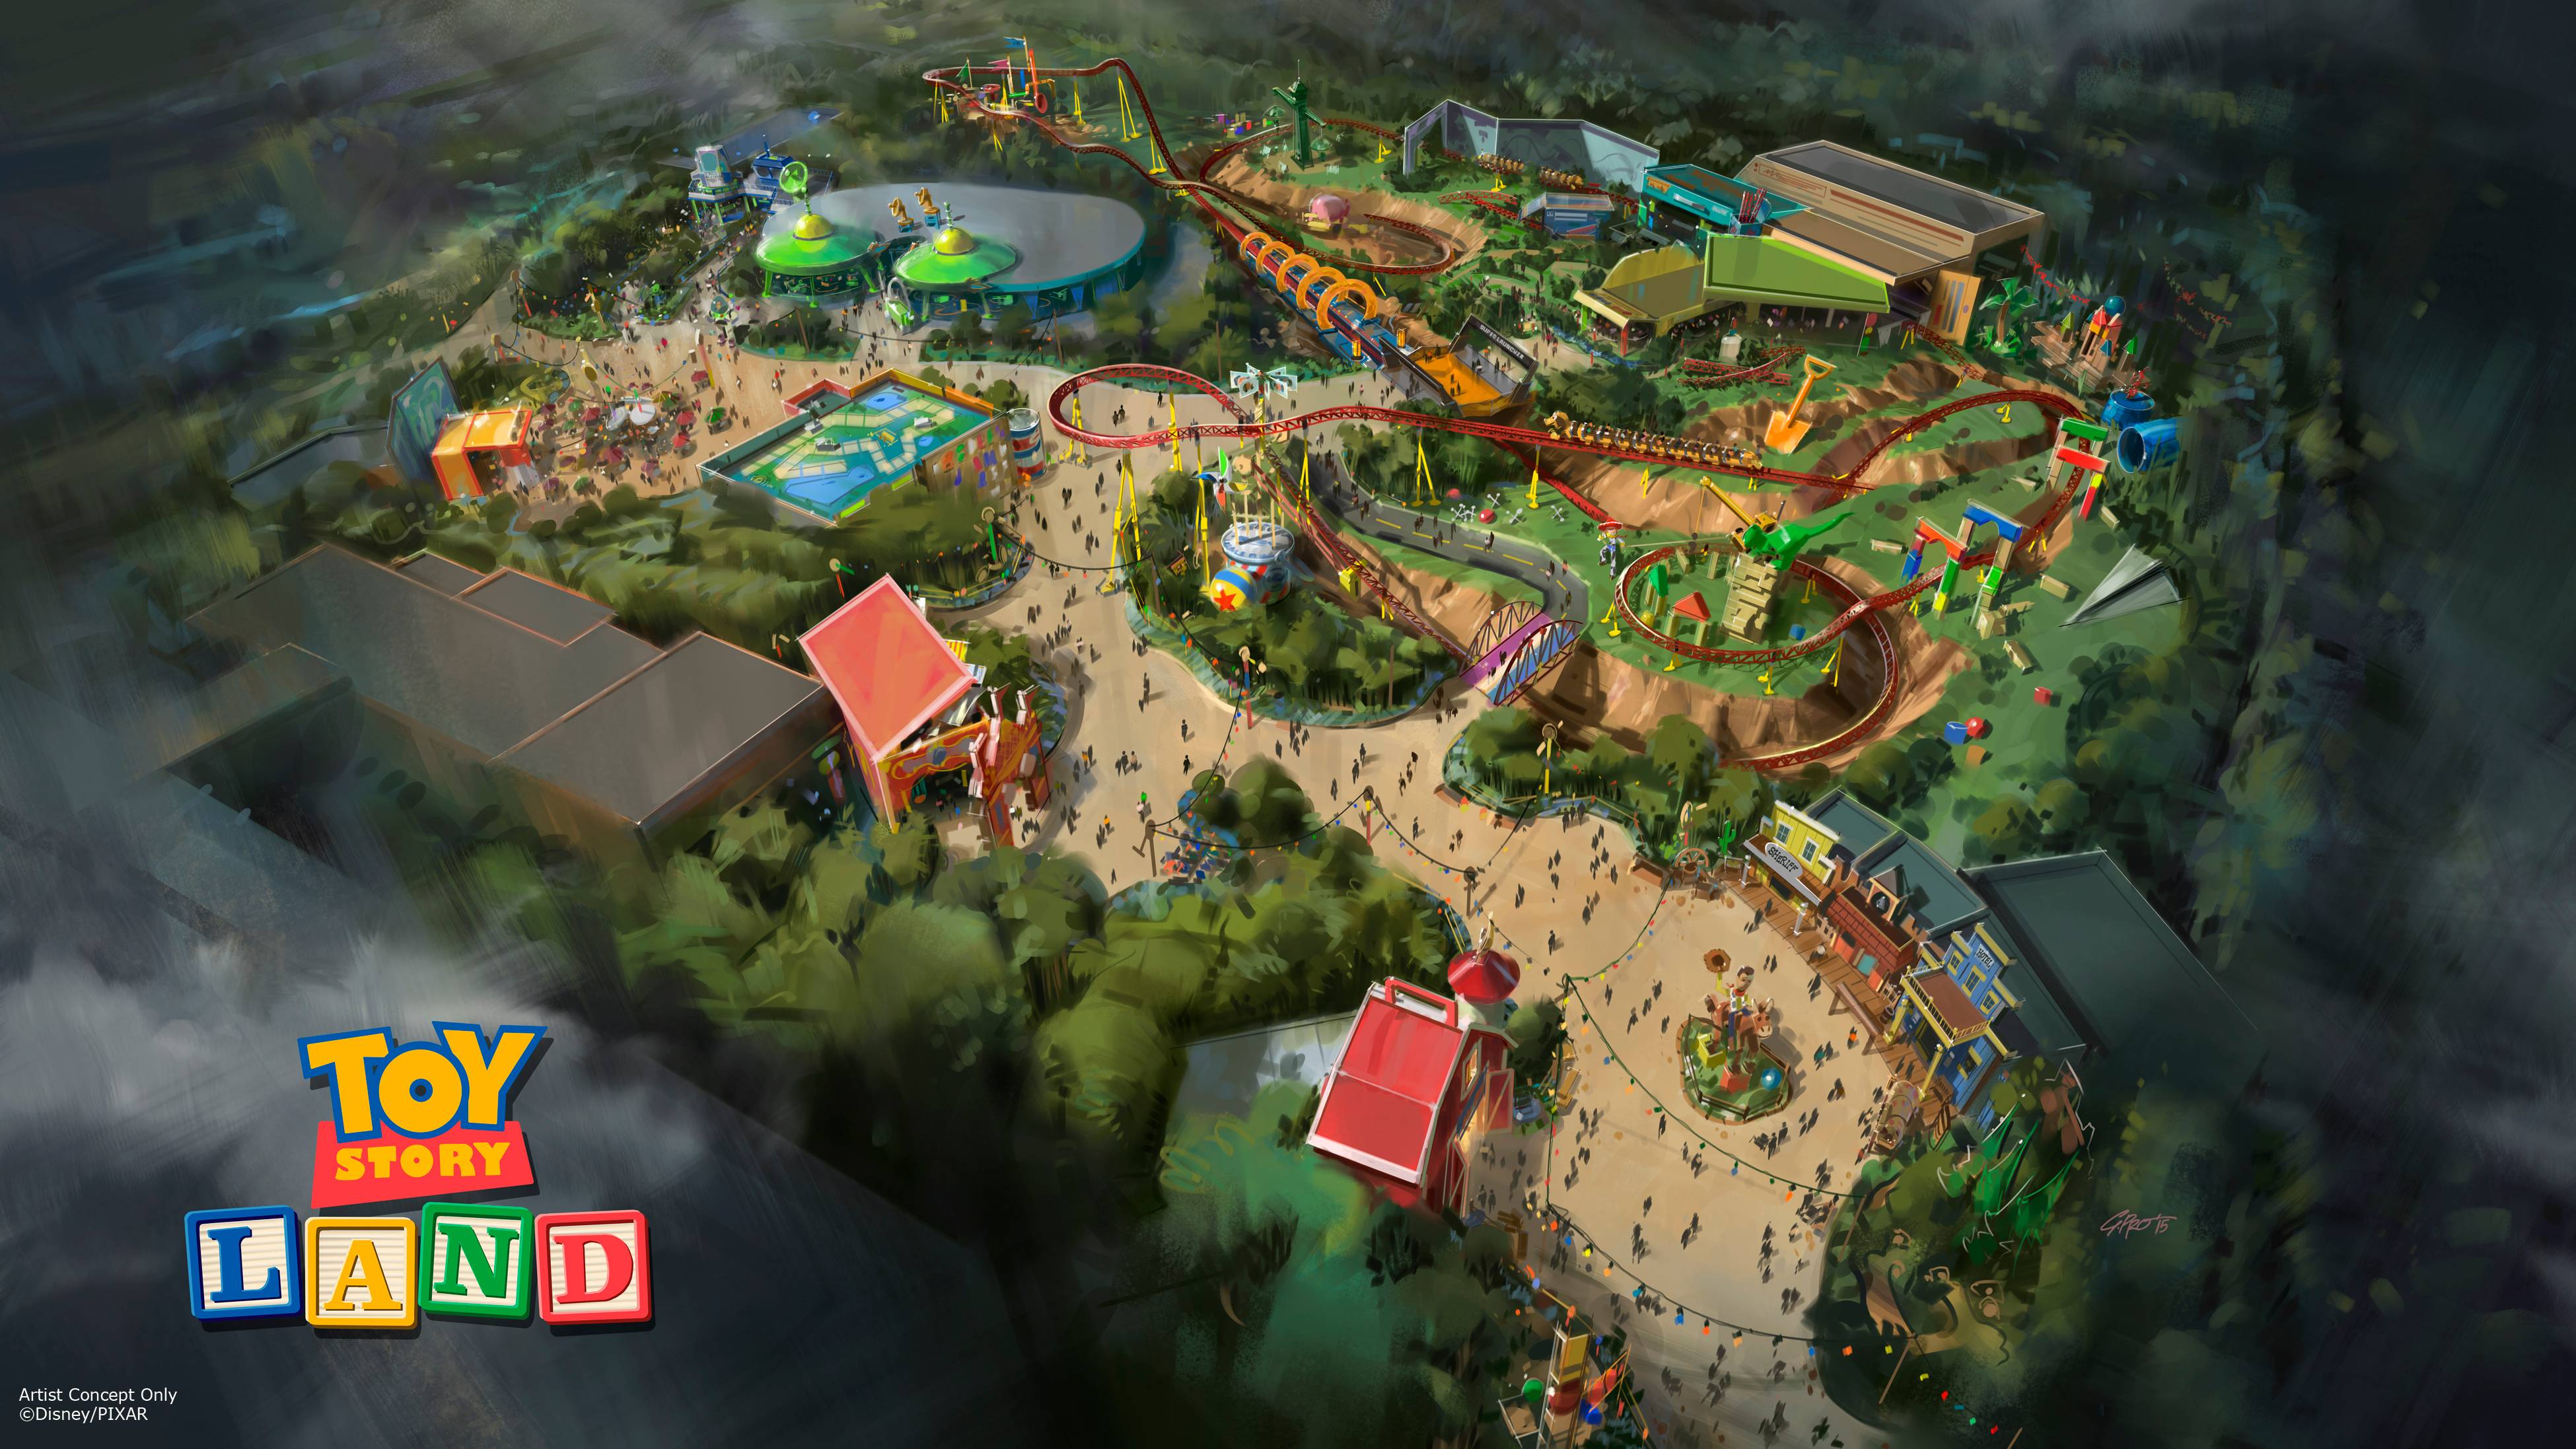 Toy Story Land announced for Disney's Hollywood Studios